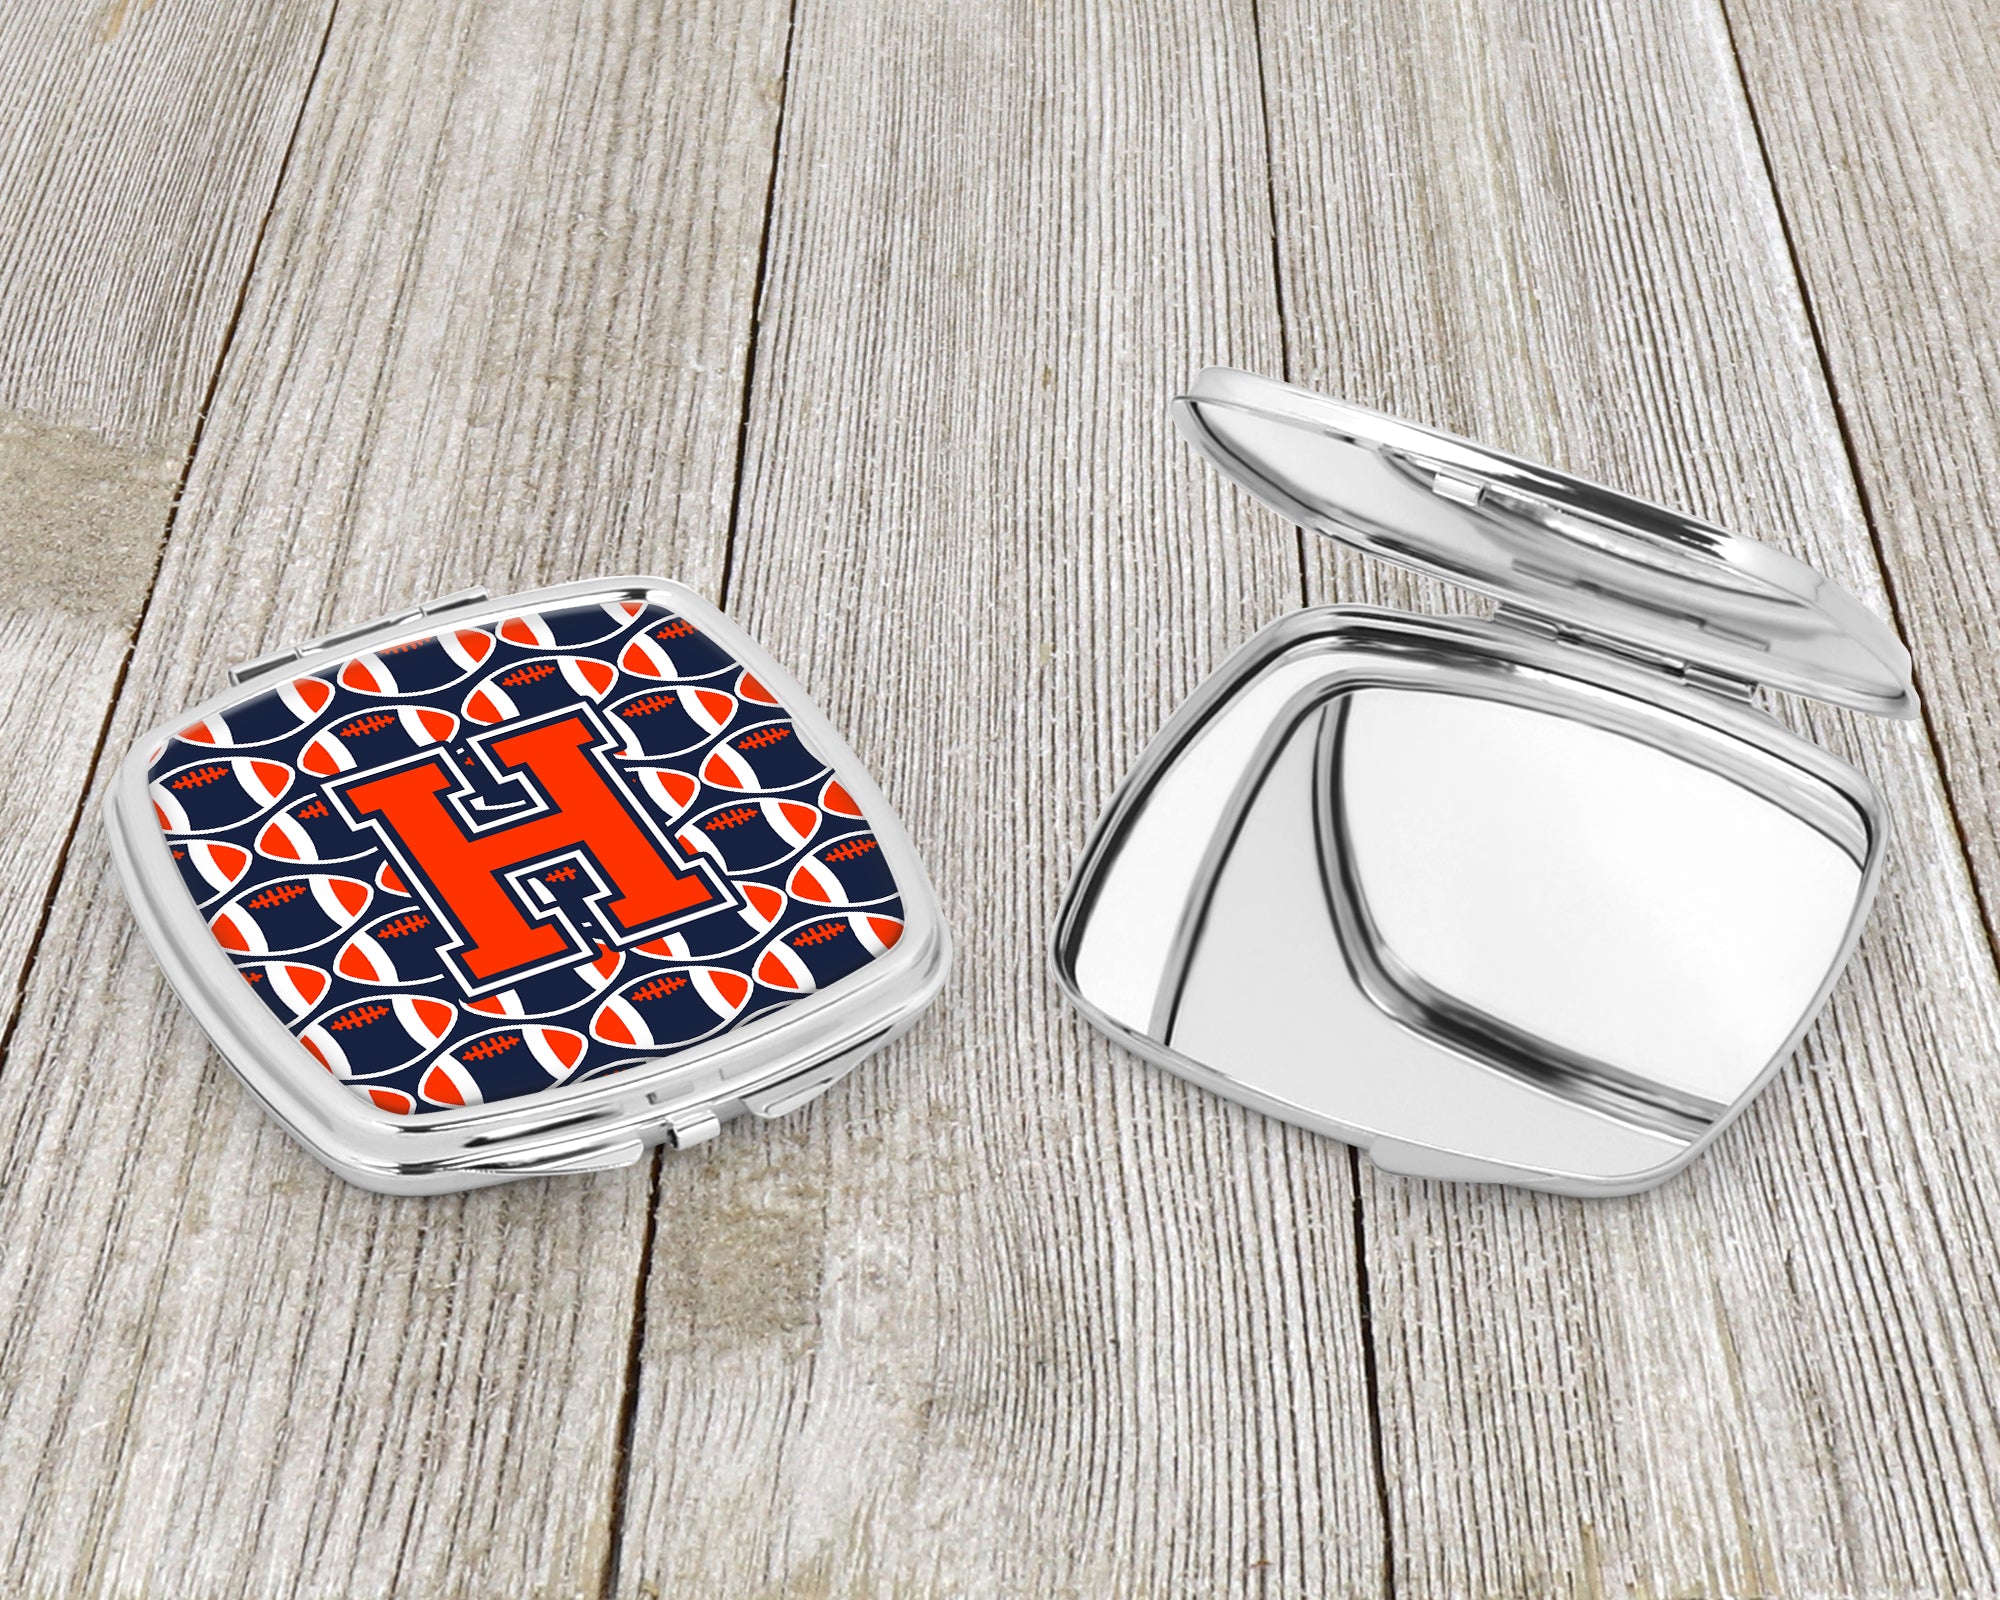 Letter H Football Orange, Blue and white Compact Mirror CJ1066-HSCM